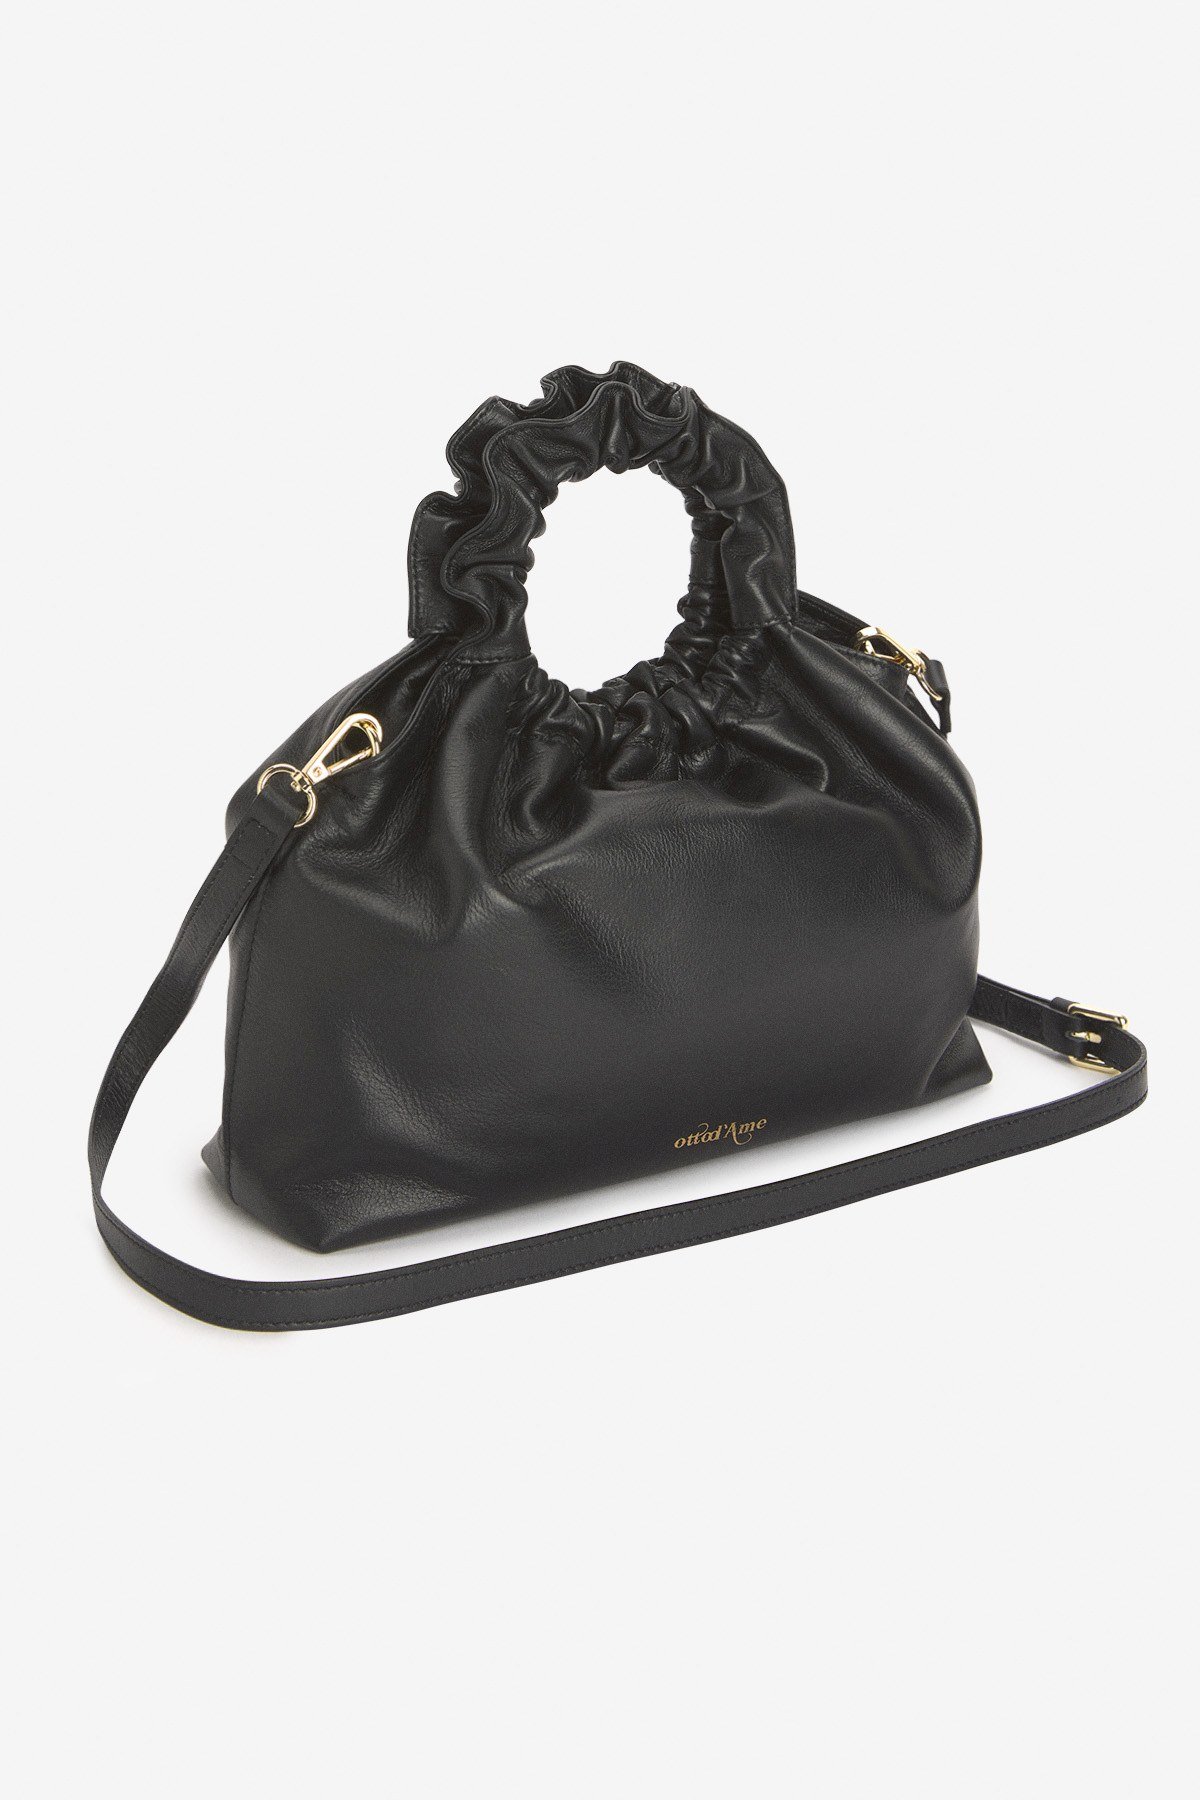 Leather embossed handbag with ring handle